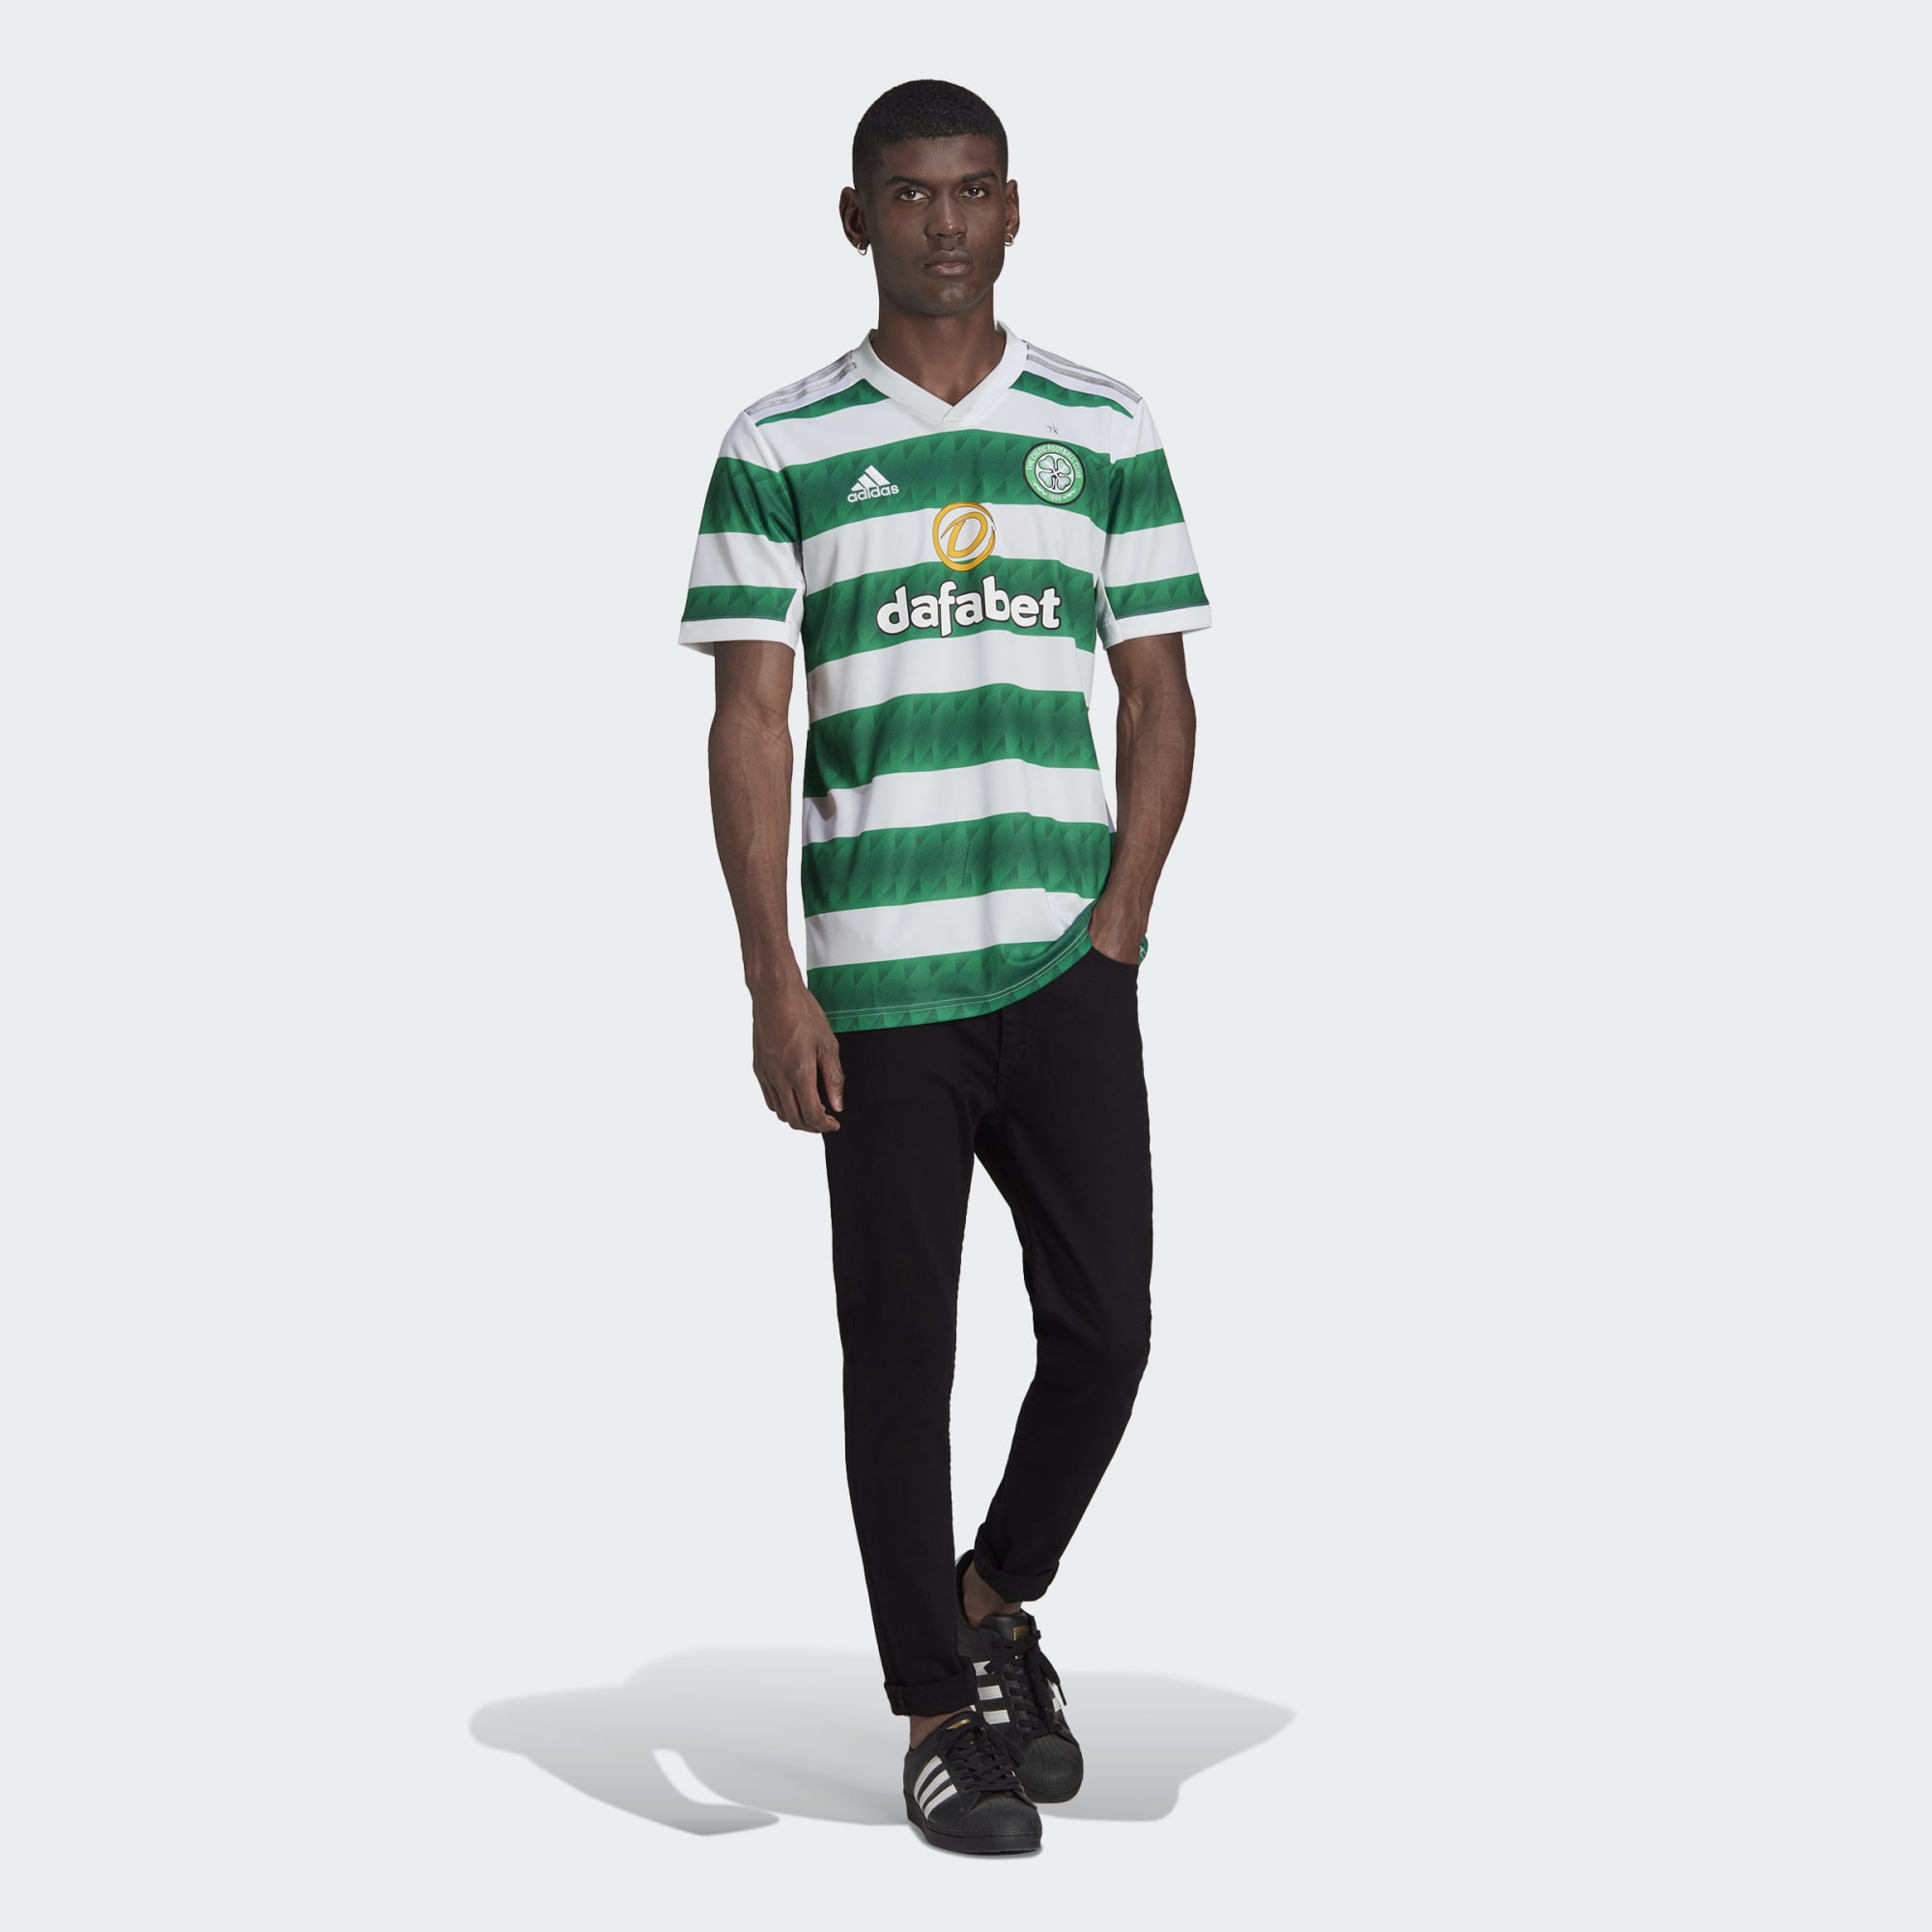  adidas Men's Soccer Celtic 21/22 Home Jersey (Small)  White/Green : Sports & Outdoors